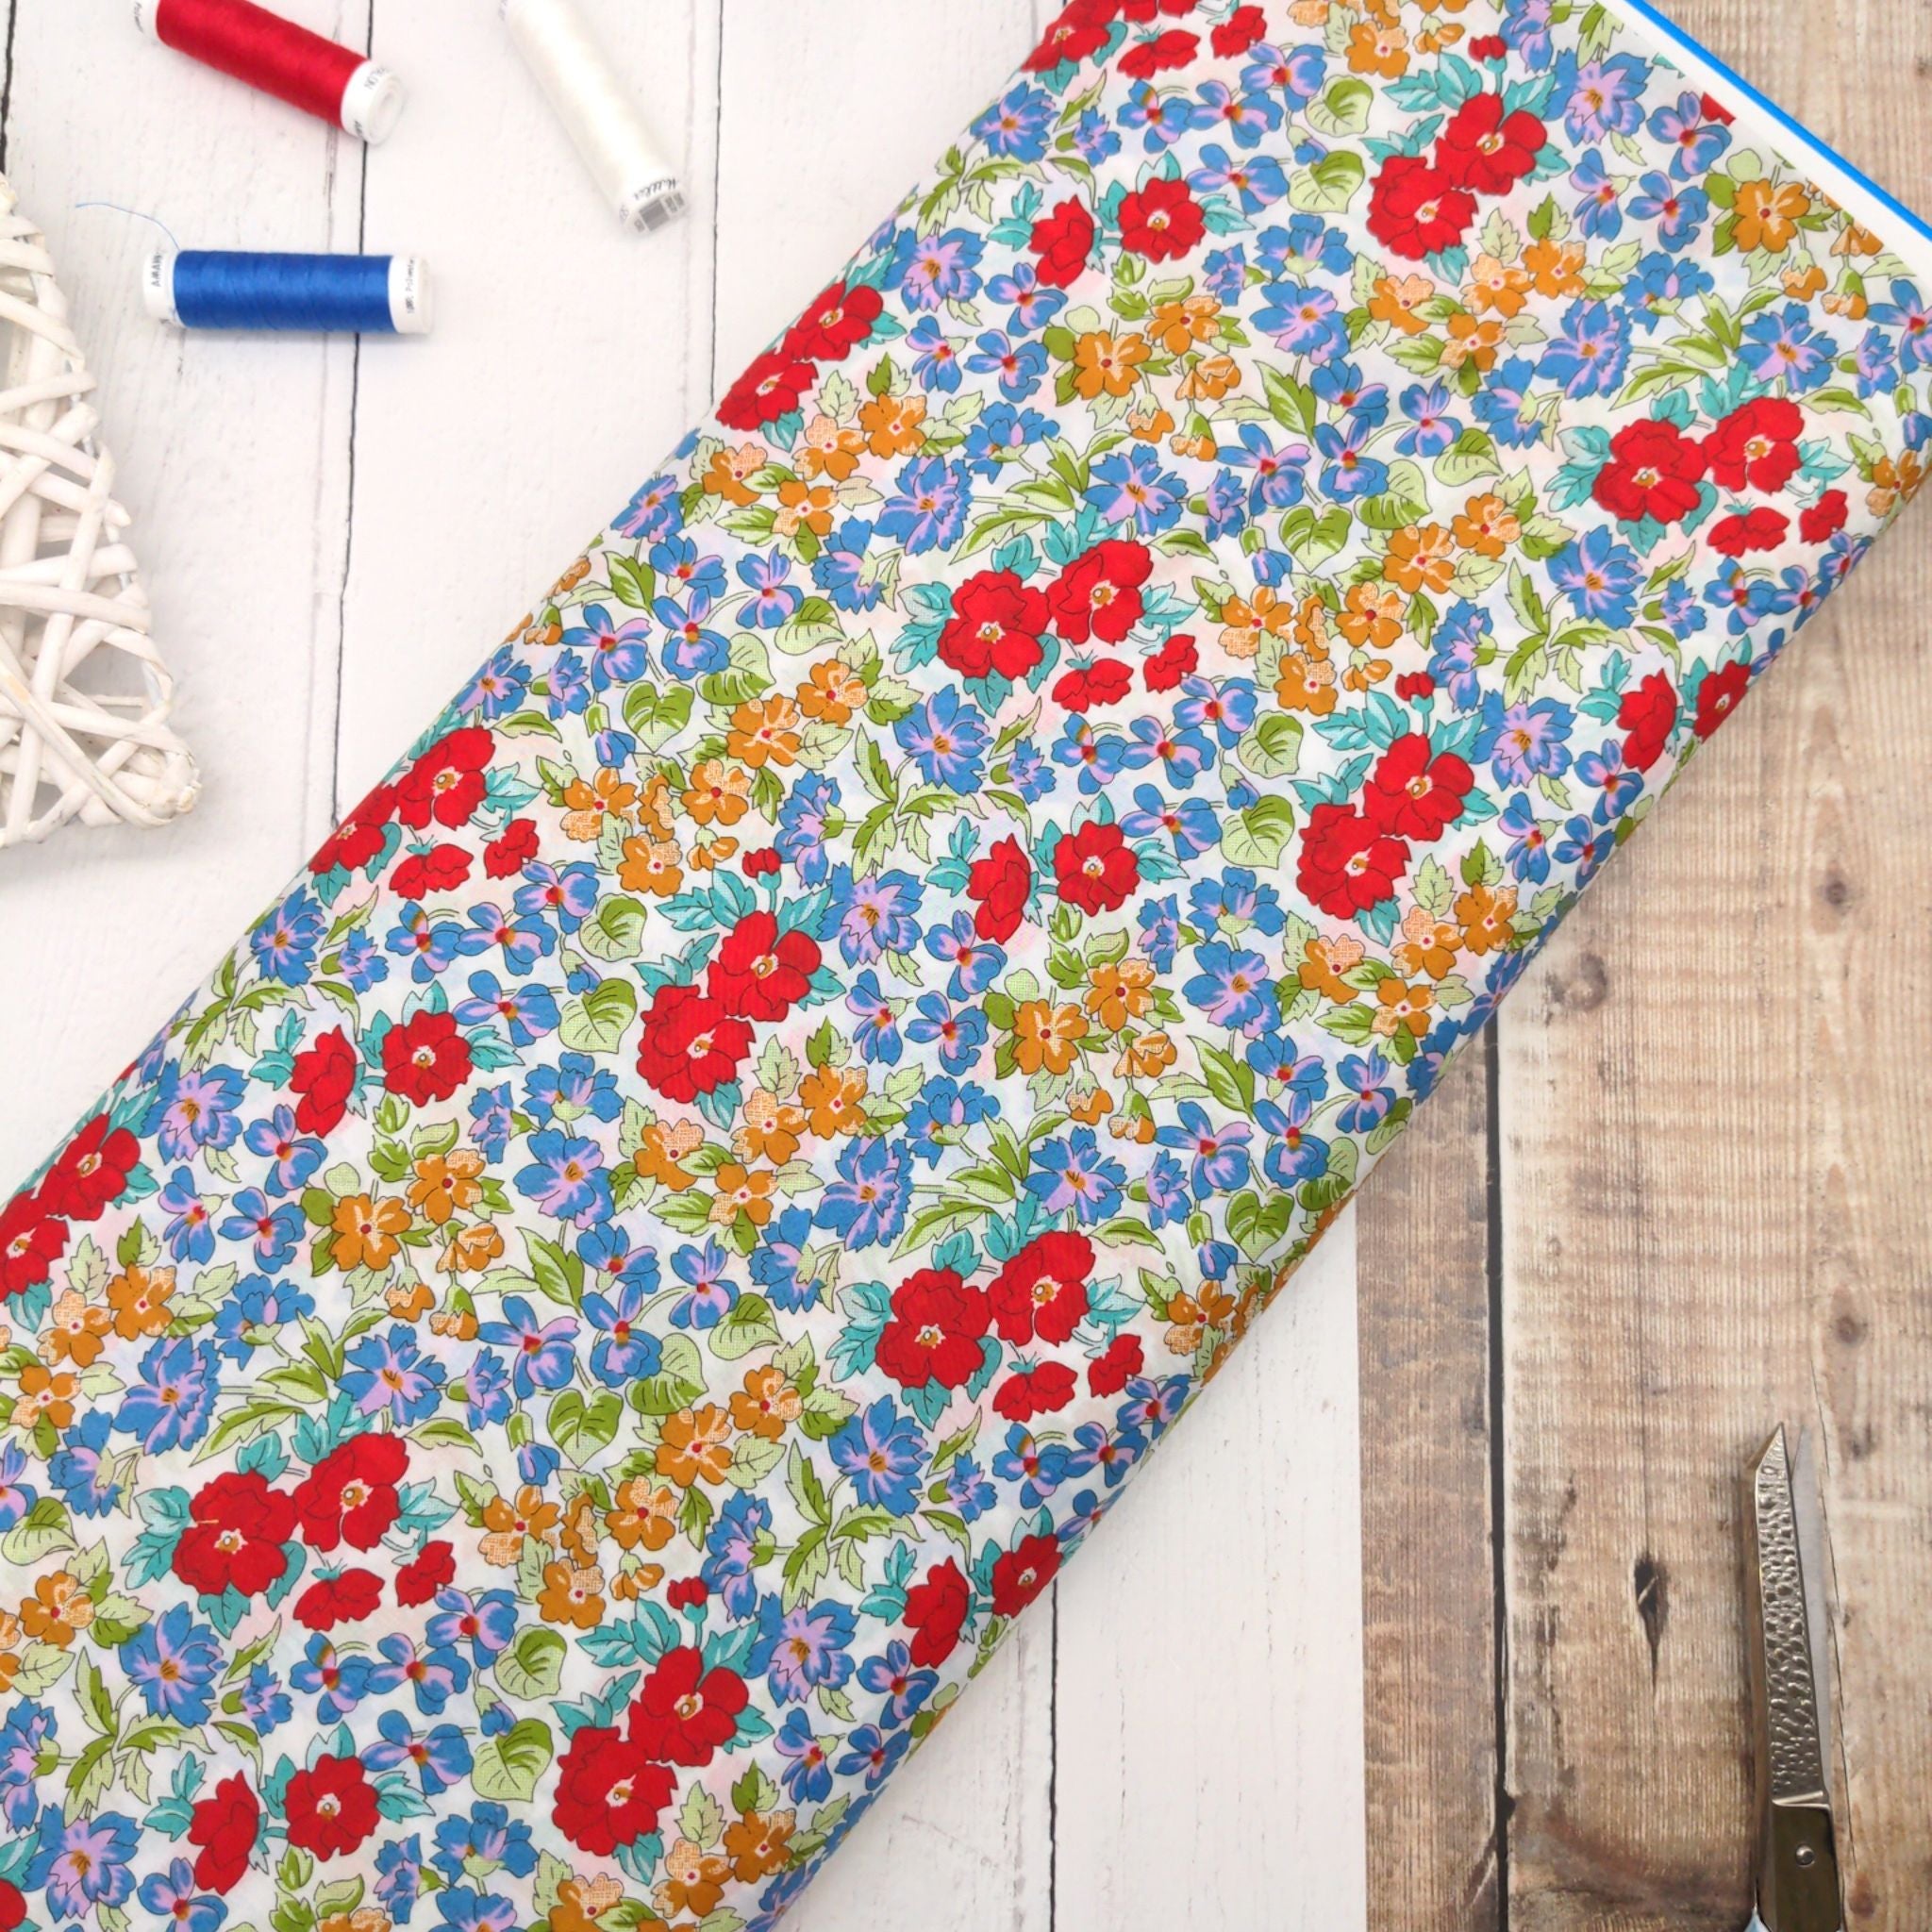 Cotton lawn dressmaking fabric with red and blue flowers - Peter Horton